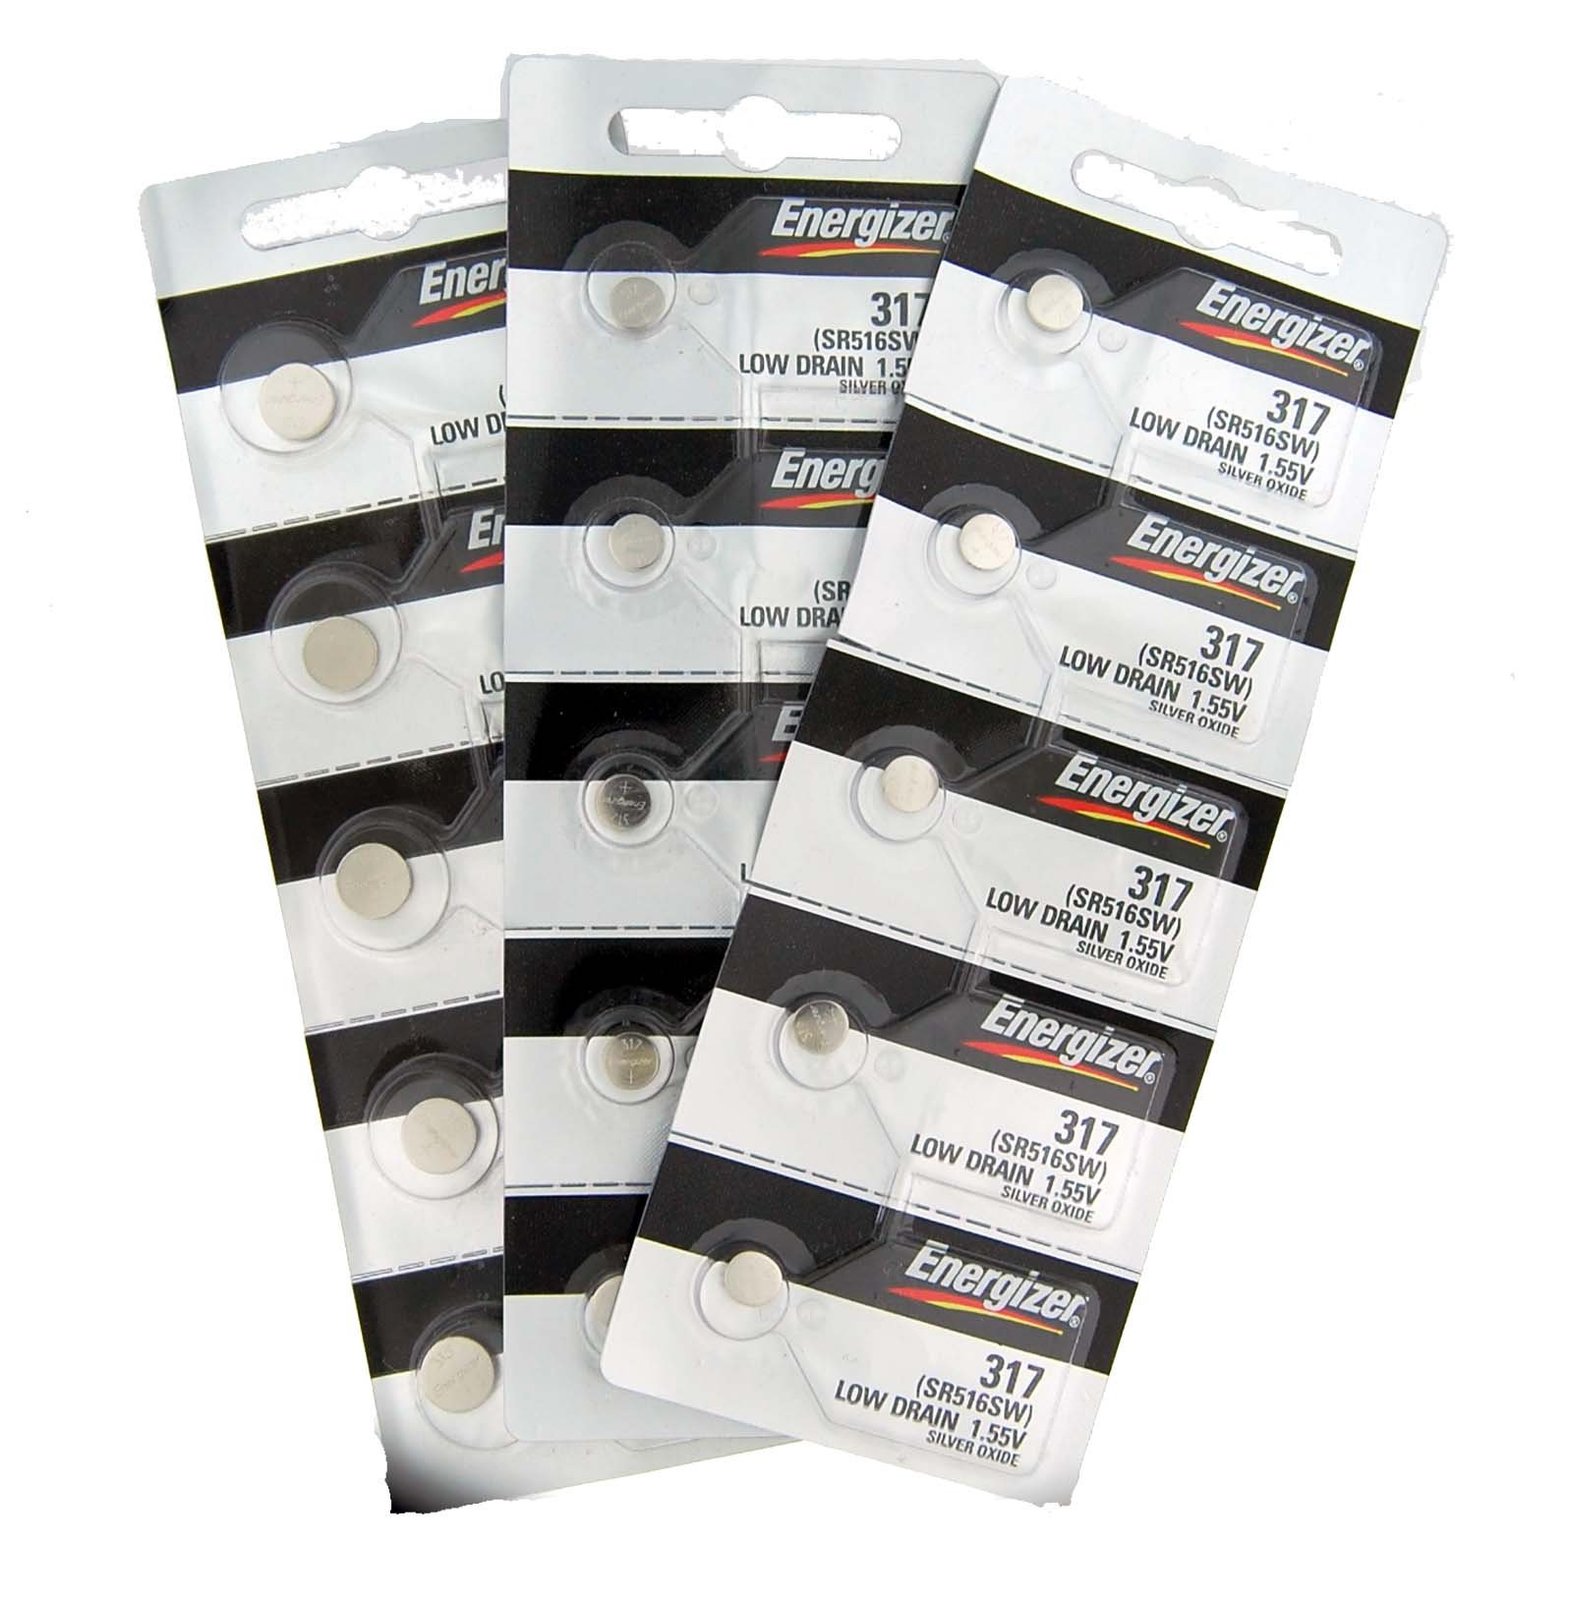 Primary image for 15 Energizer 317 Button Cell Silver Oxide SR516SW Watch Battery Pack of 5 Batter